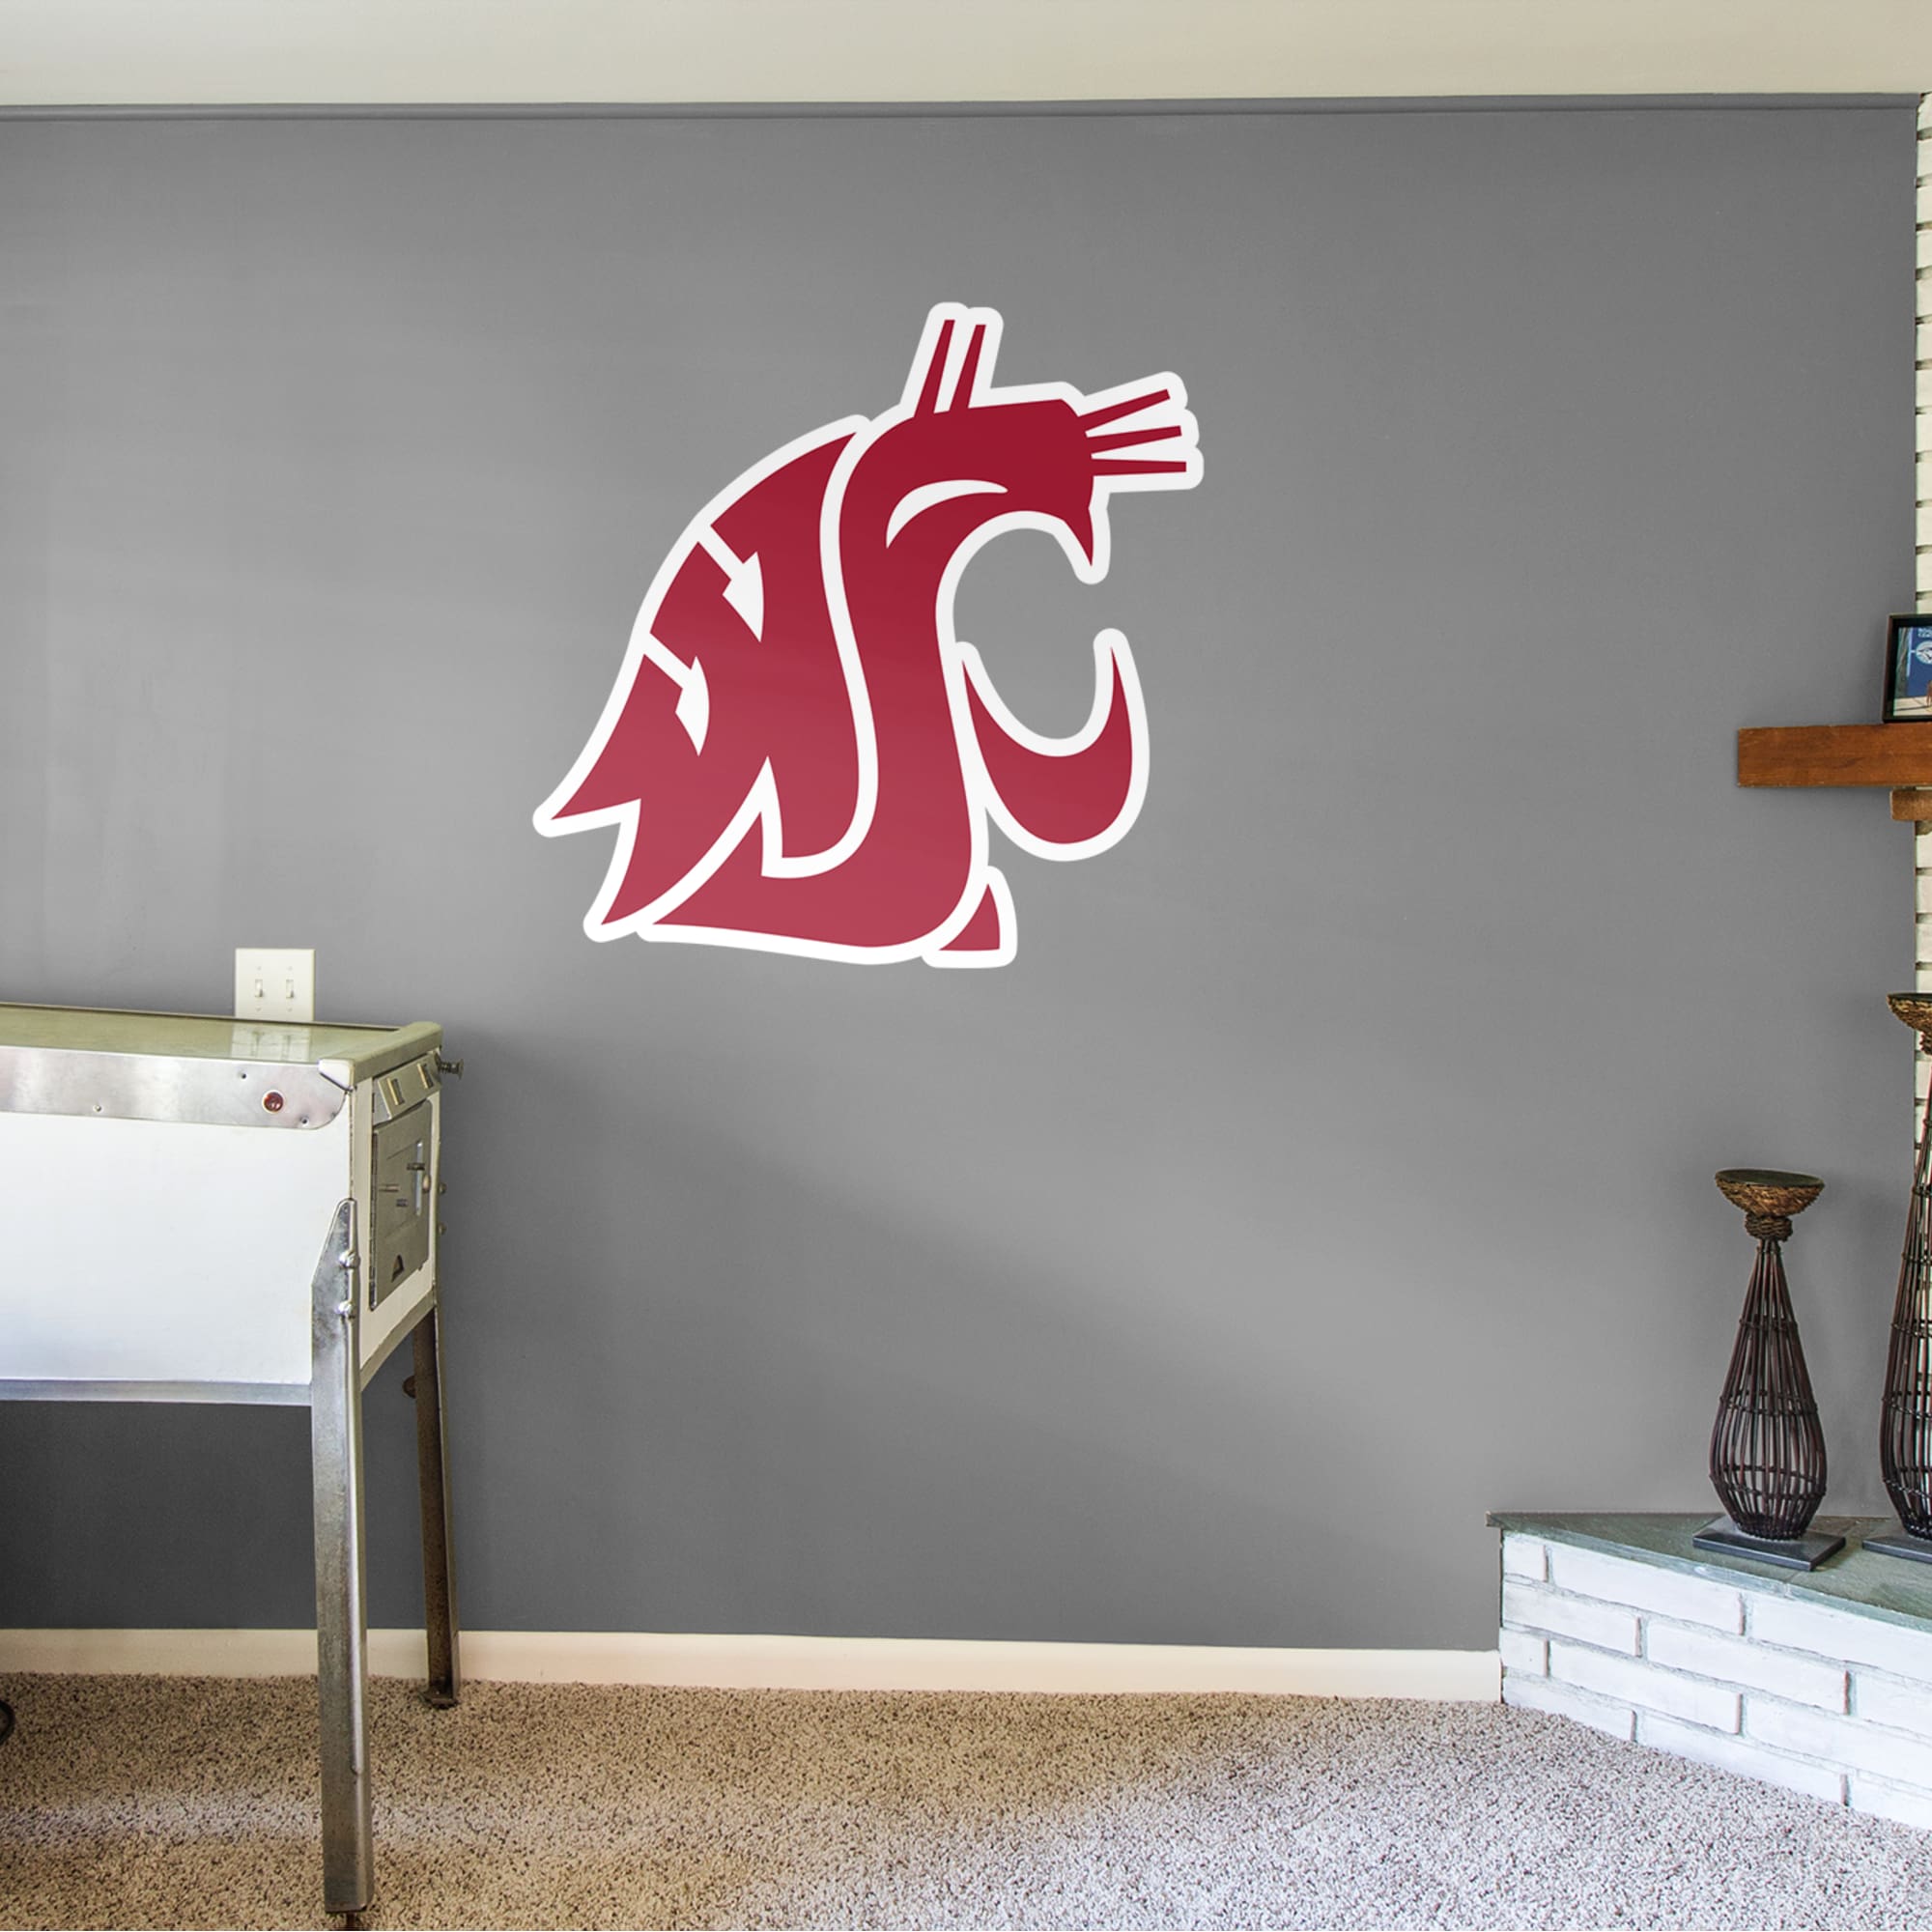 Washington State Cougars: Logo - Officially Licensed Removable Wall Decal 41.0"W x 41.0"H by Fathead | Vinyl